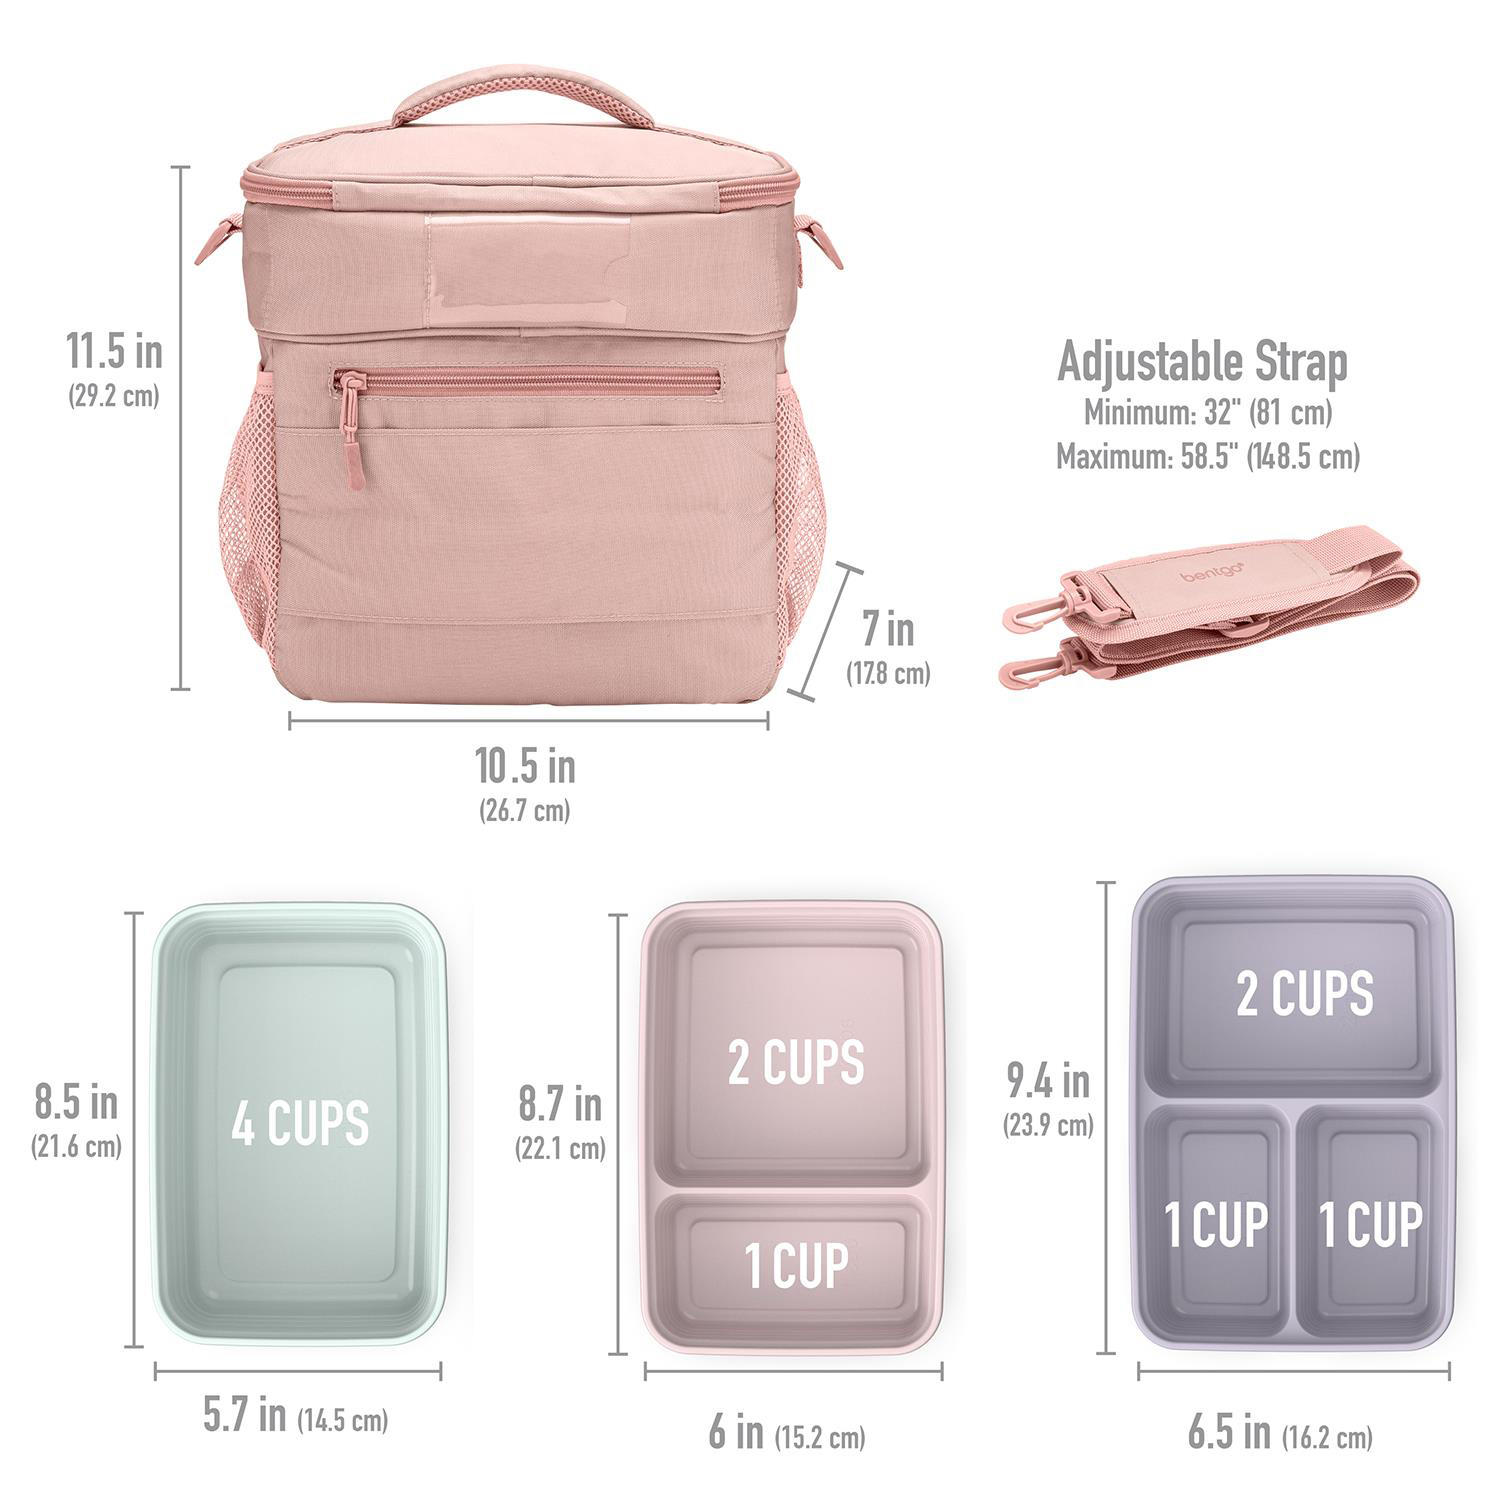  Bentgo® Prep DeluxeInsulated Multimeal Bag - Lunch Box